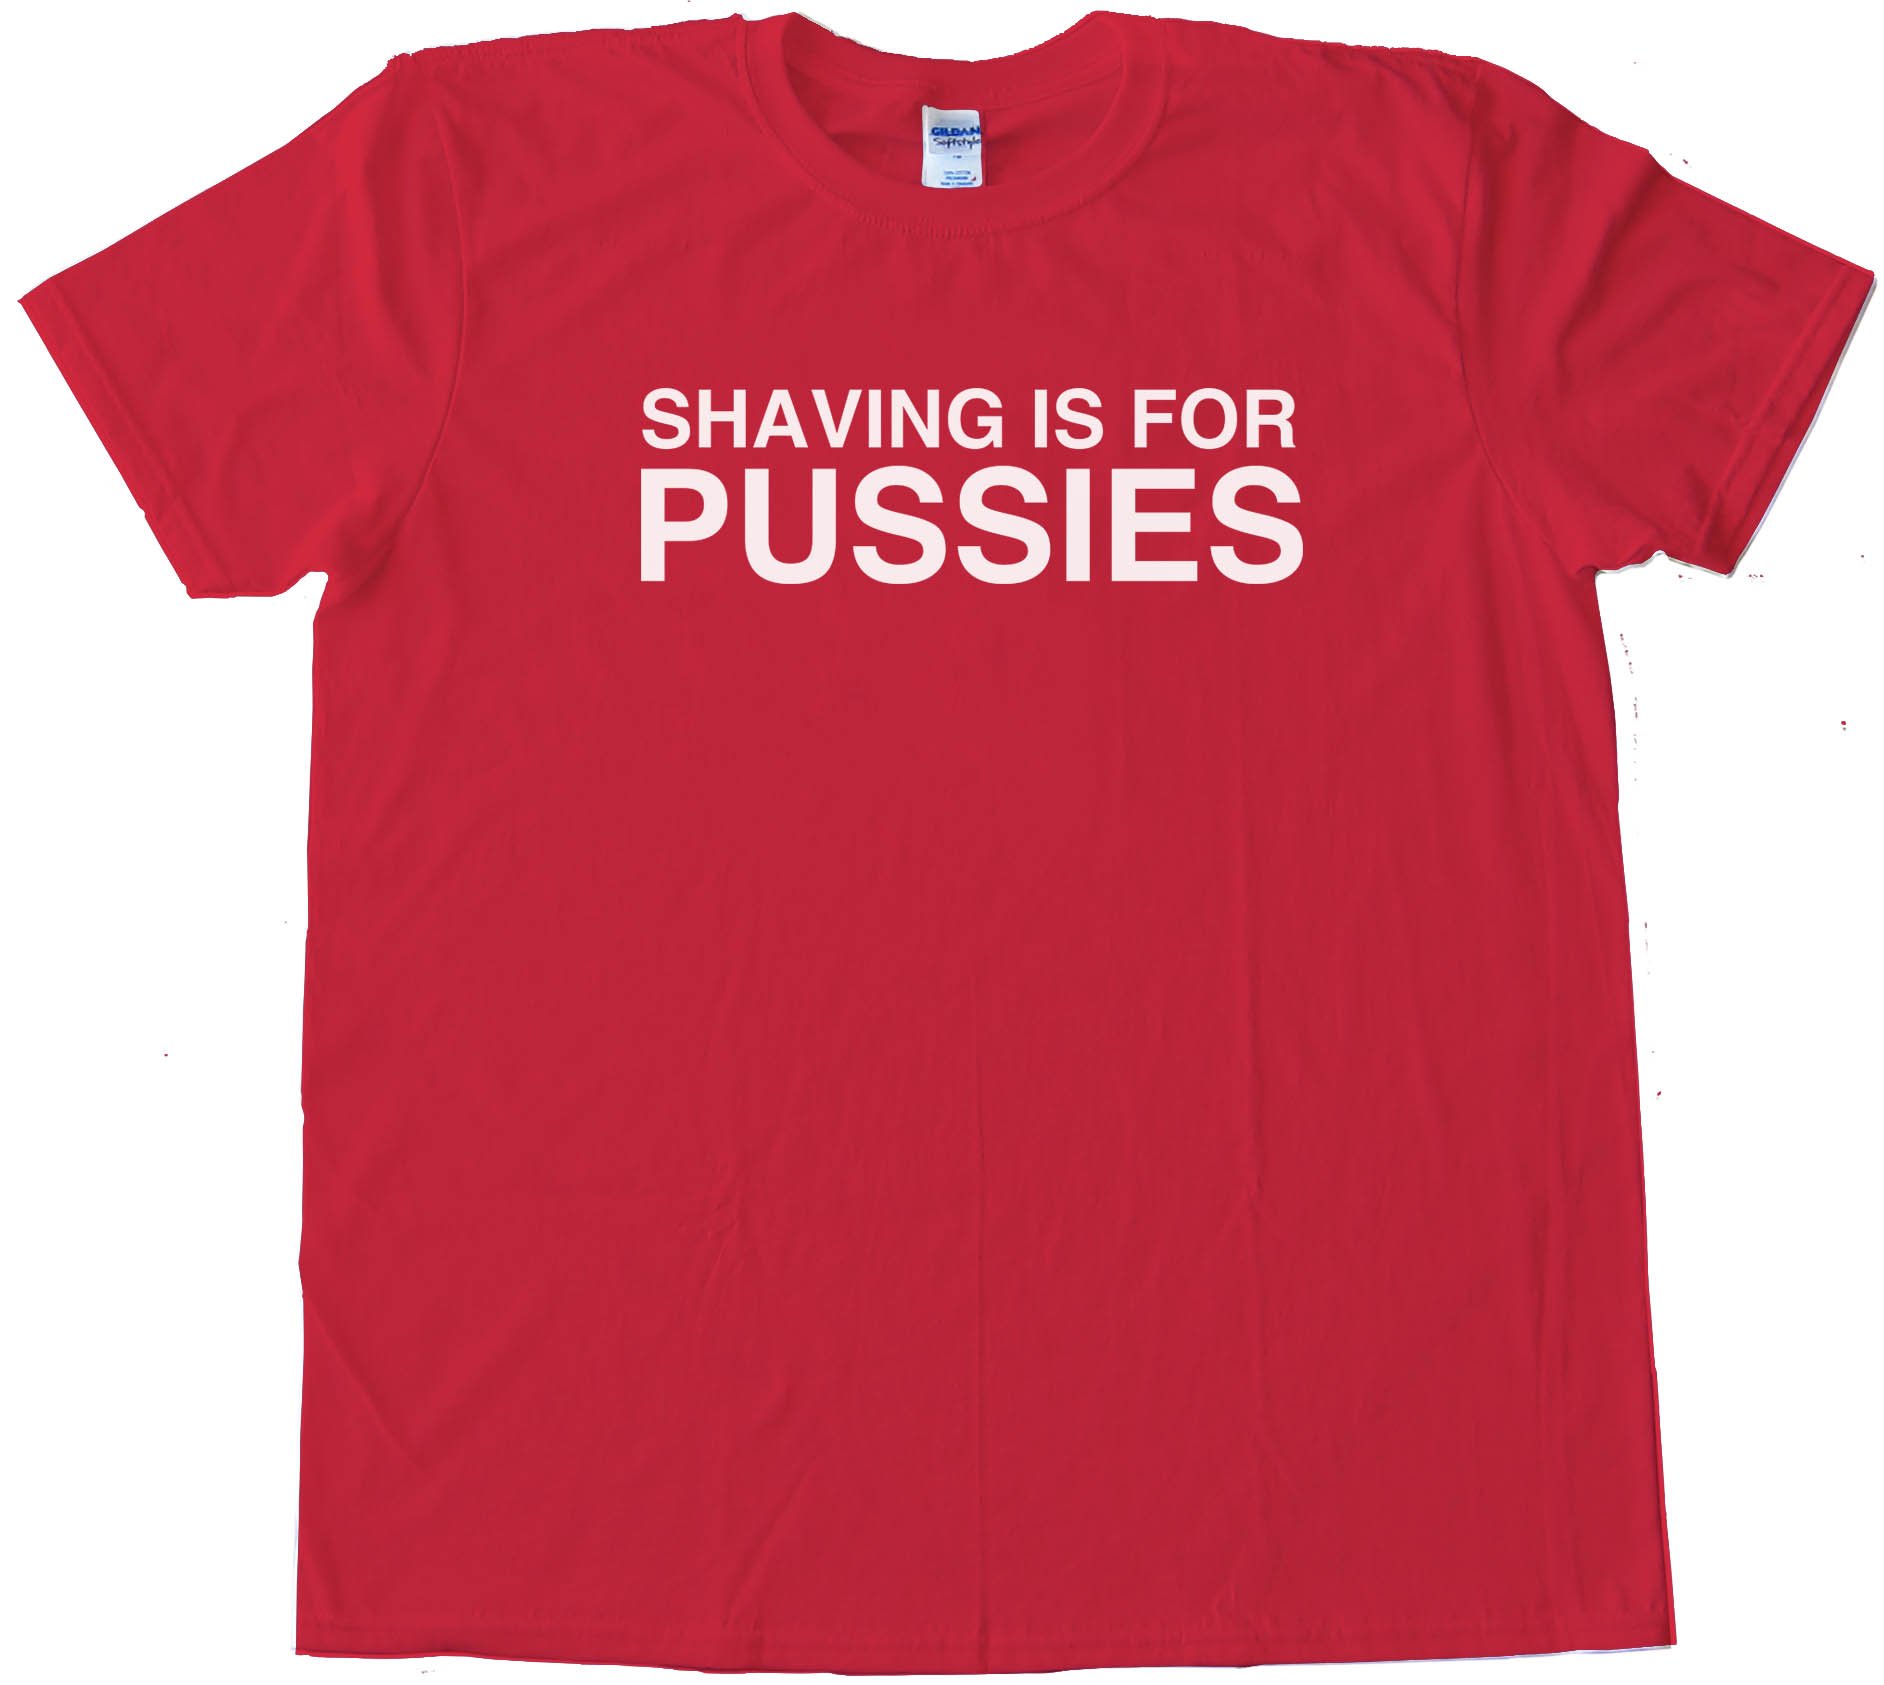 Shaving Is For Pussies - Tee Shirt